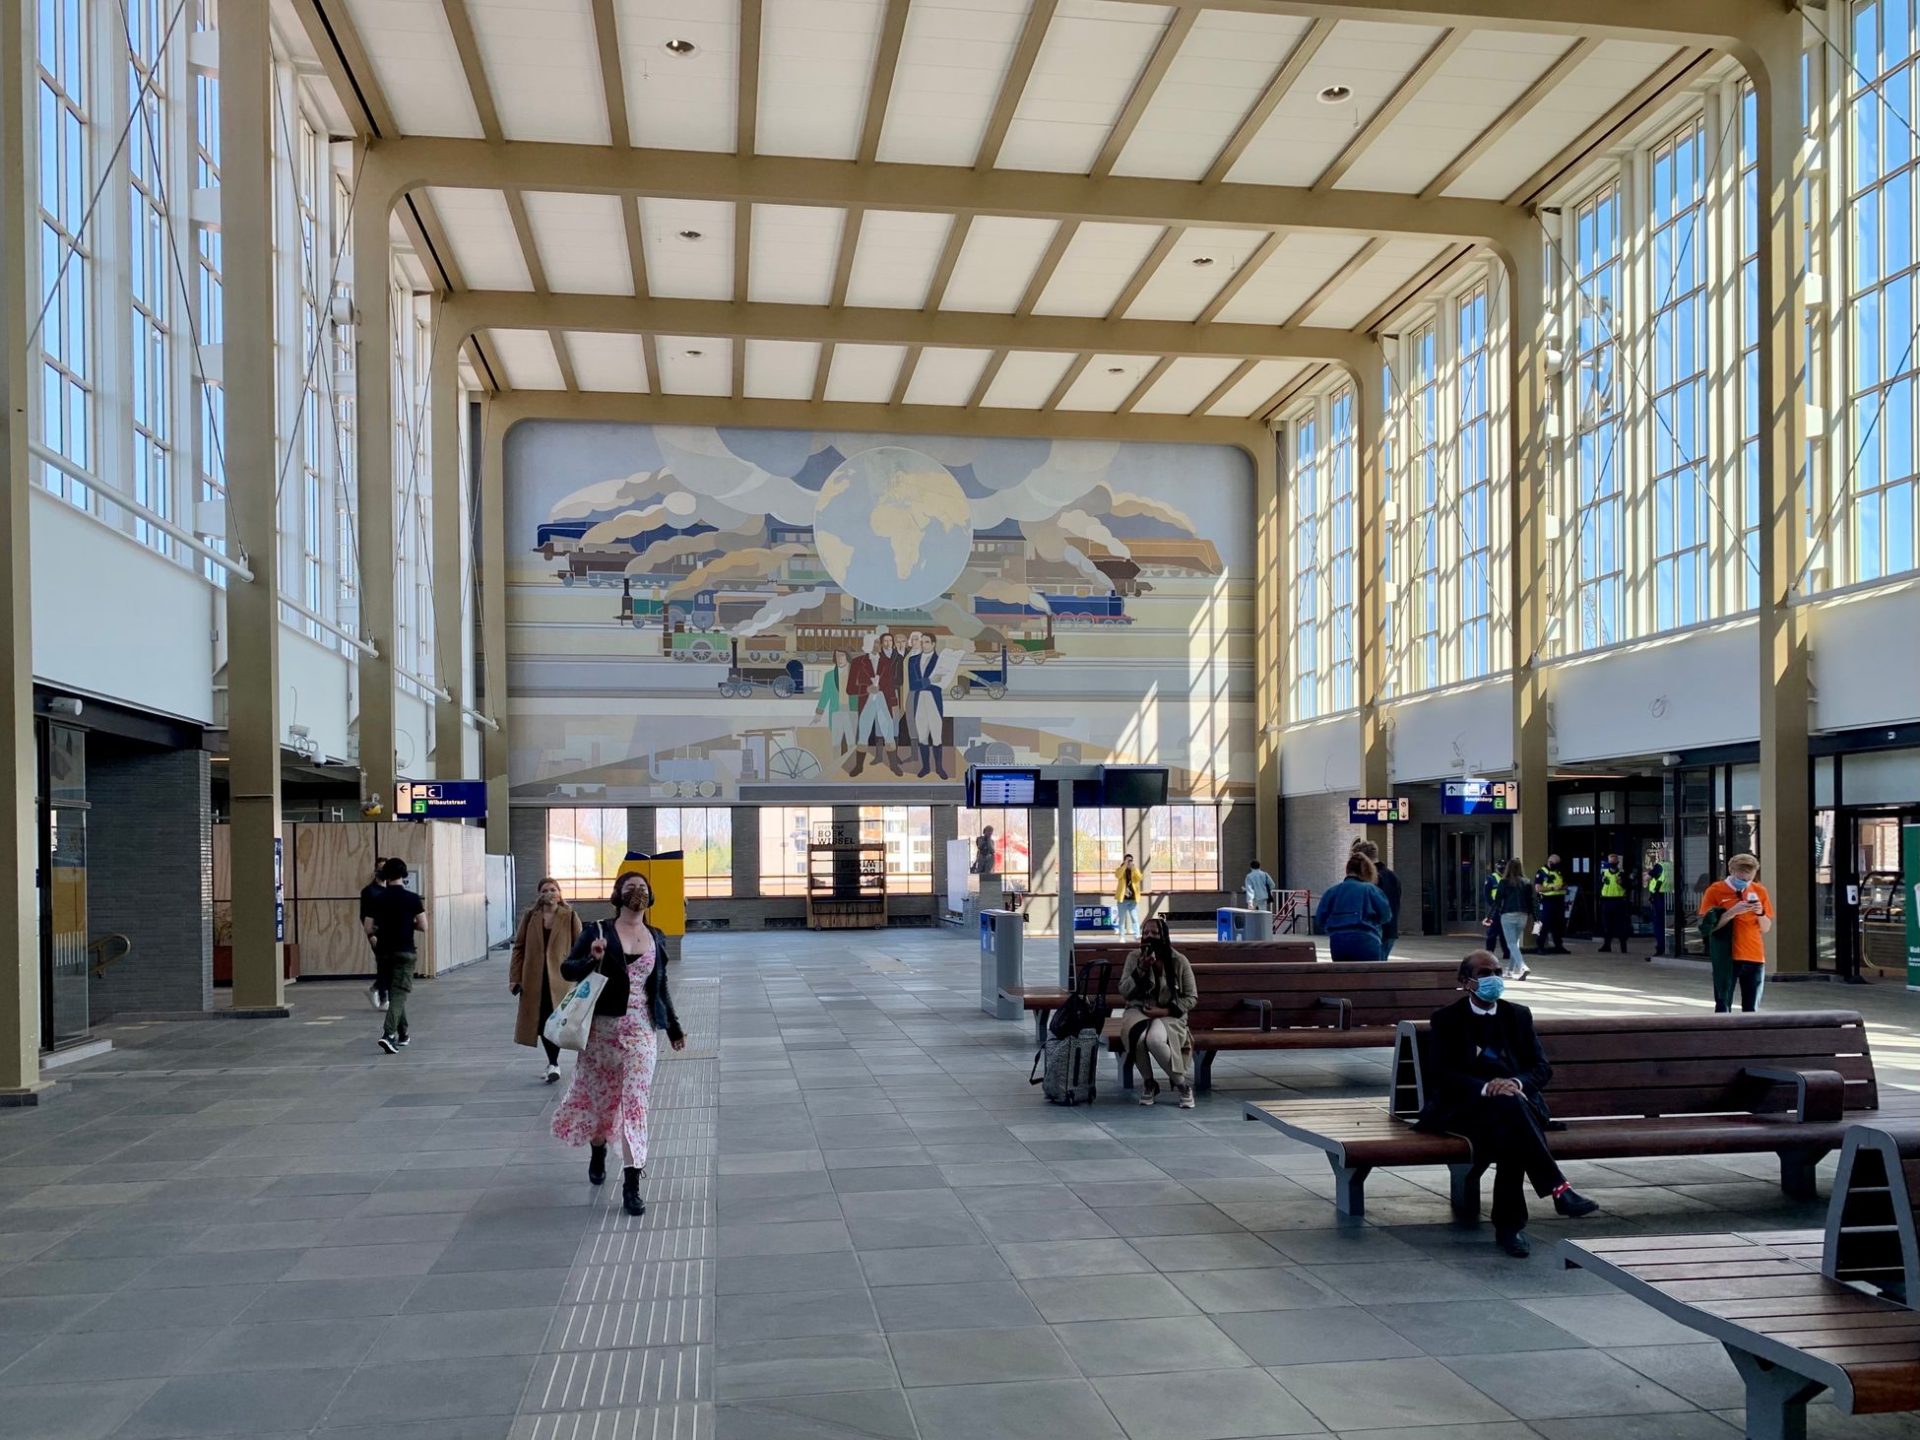 The east side of the main hall with wall painting by Peter Alma.